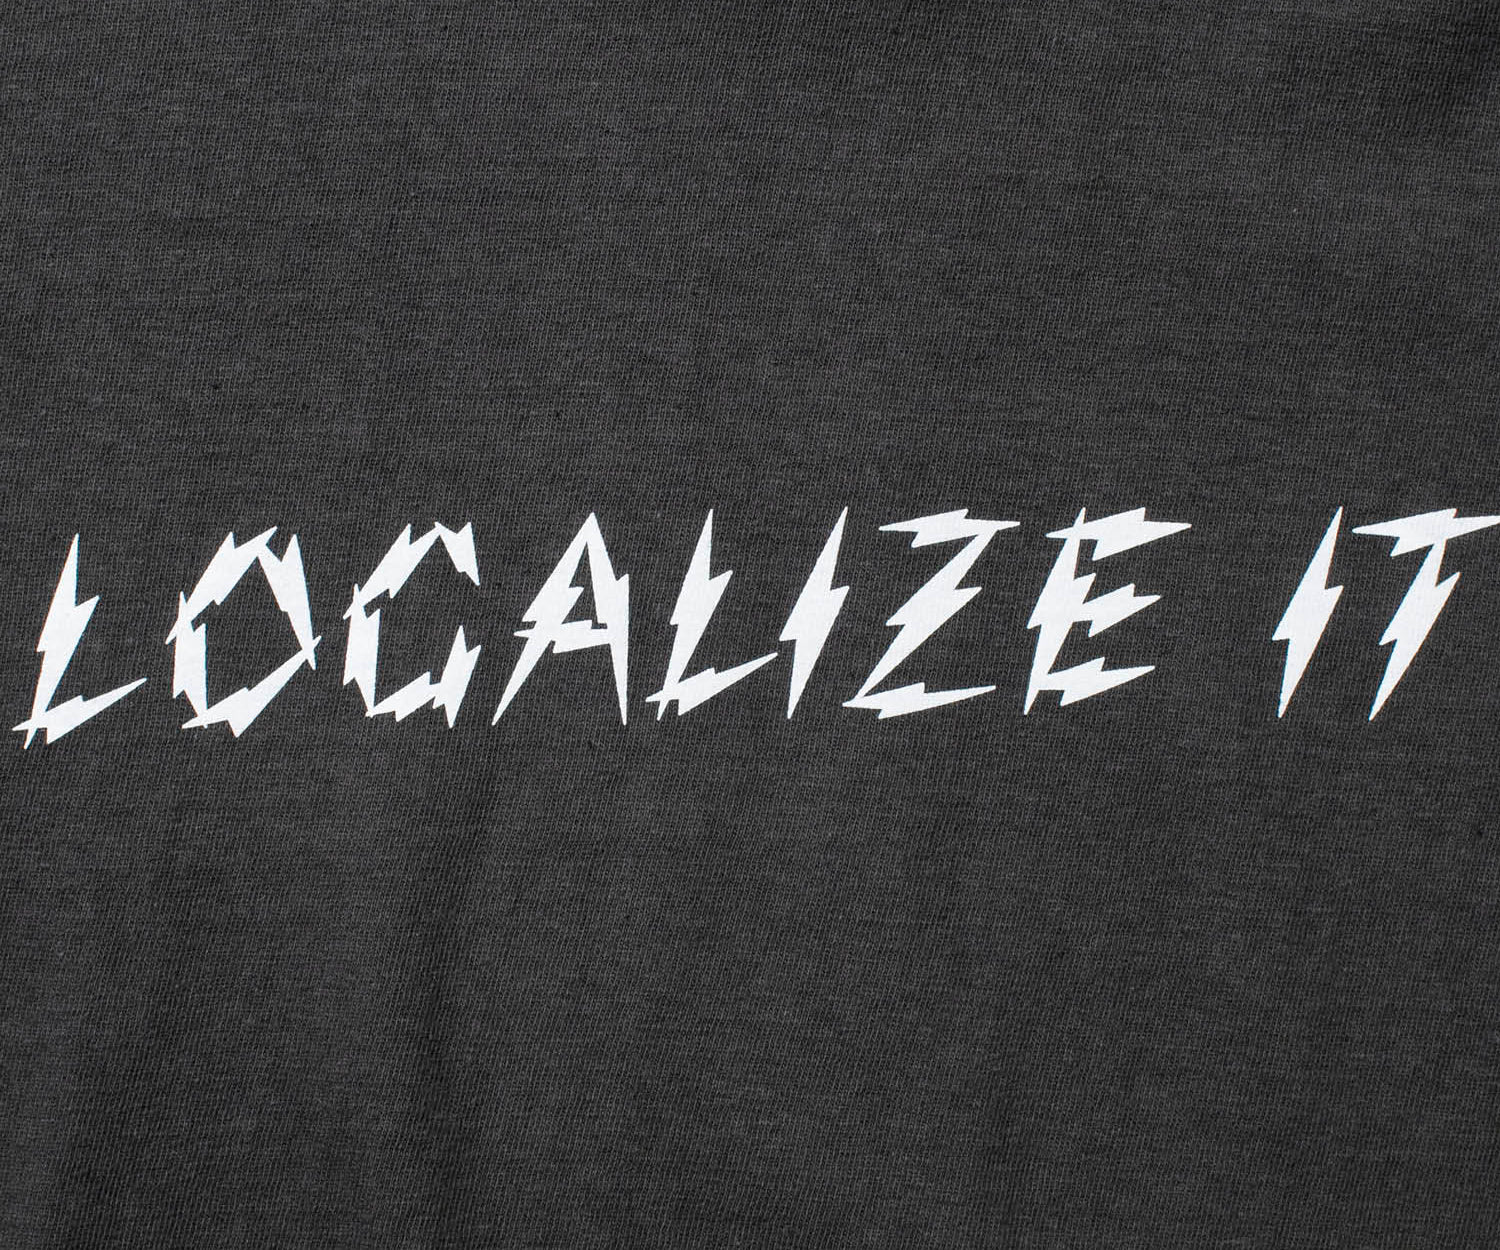 Recycle Organic Cotton Bamboo Charcoal Dye Tee - Localize It | LIKE THIS SHOP